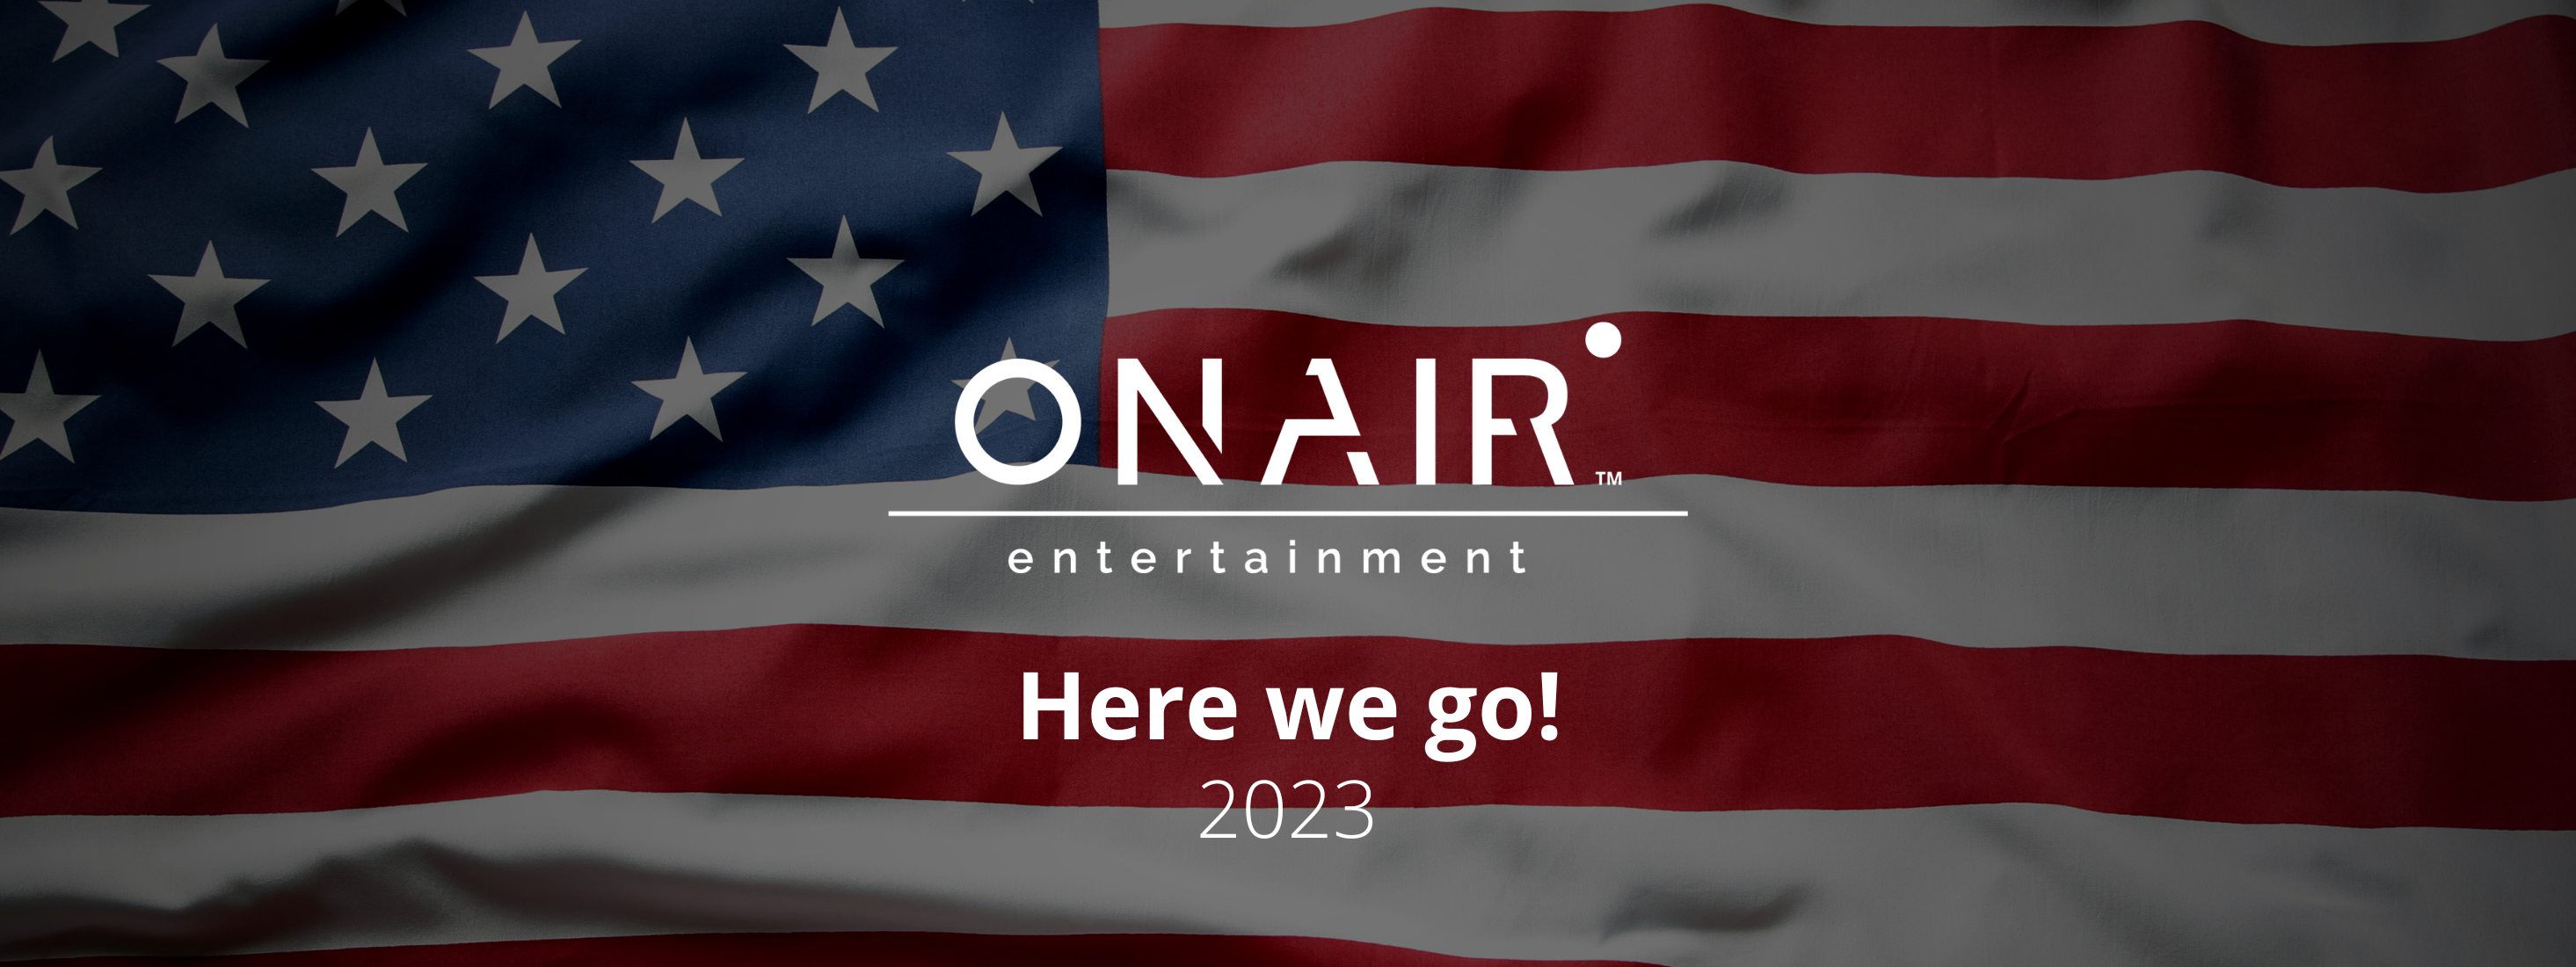 OnAir's logo against the background of the US flag ahead of their launch into the US.